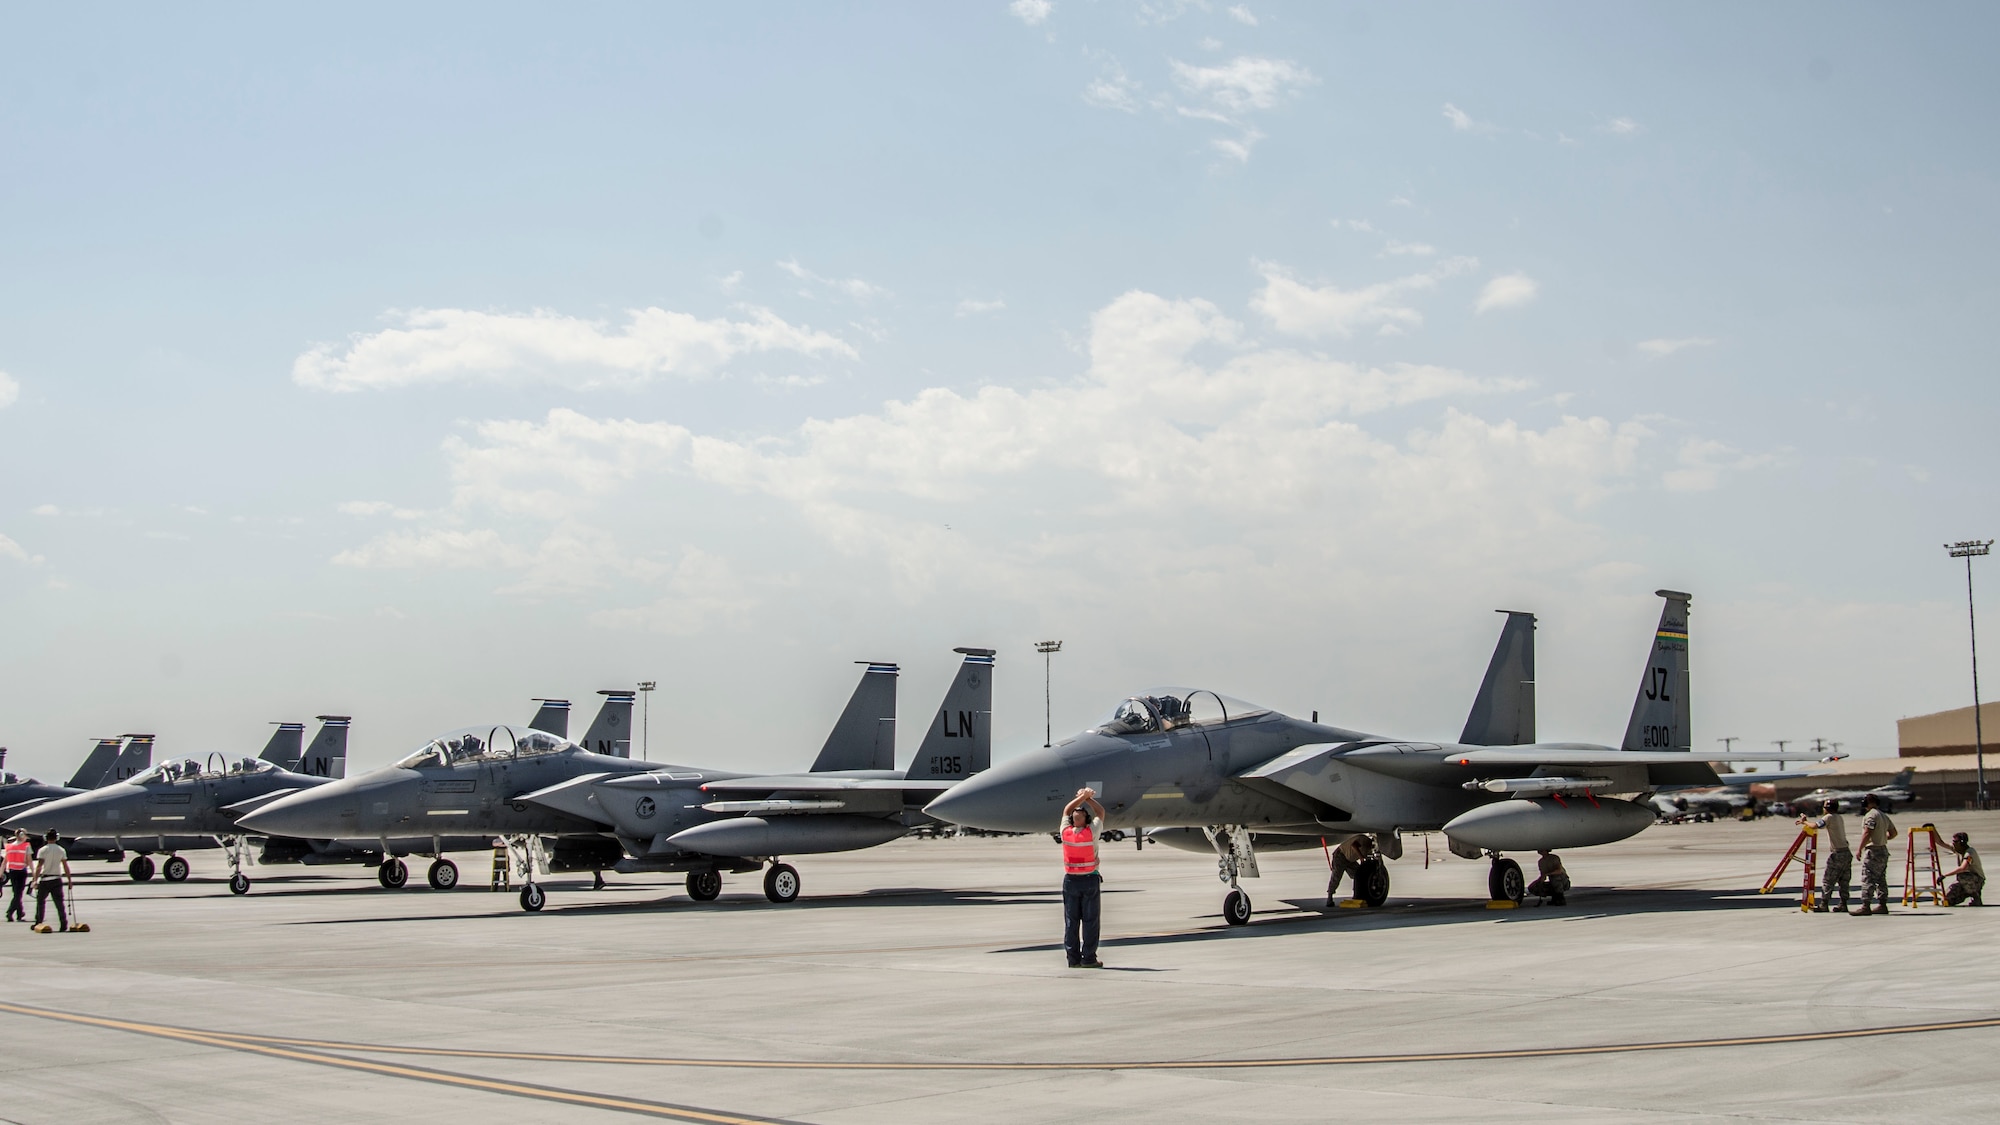 An F-15C Eagle from the 122nd Fighter Squadron, assigned to the 159th Fighter Wing, Louisiana Air National Guard, awaits permission to take off next to four F‐15E Strike Eagles assigned to the 492nd Fighter Squadron, Royal Air Force Lakenheath, England, during a day sortie at Nellis Air Force Base, Nev., Aug. 24, 2016. The main difference between the F-15C and F-15E model is the C model only has one seat and is designed only for air-to-air combat, whereas the F-15E model has a second seat for a weapon systems officer and focuses primarily on dropping munitions on targets. (U. S. Air Force photo by Tech. Sgt. Frank Miller)